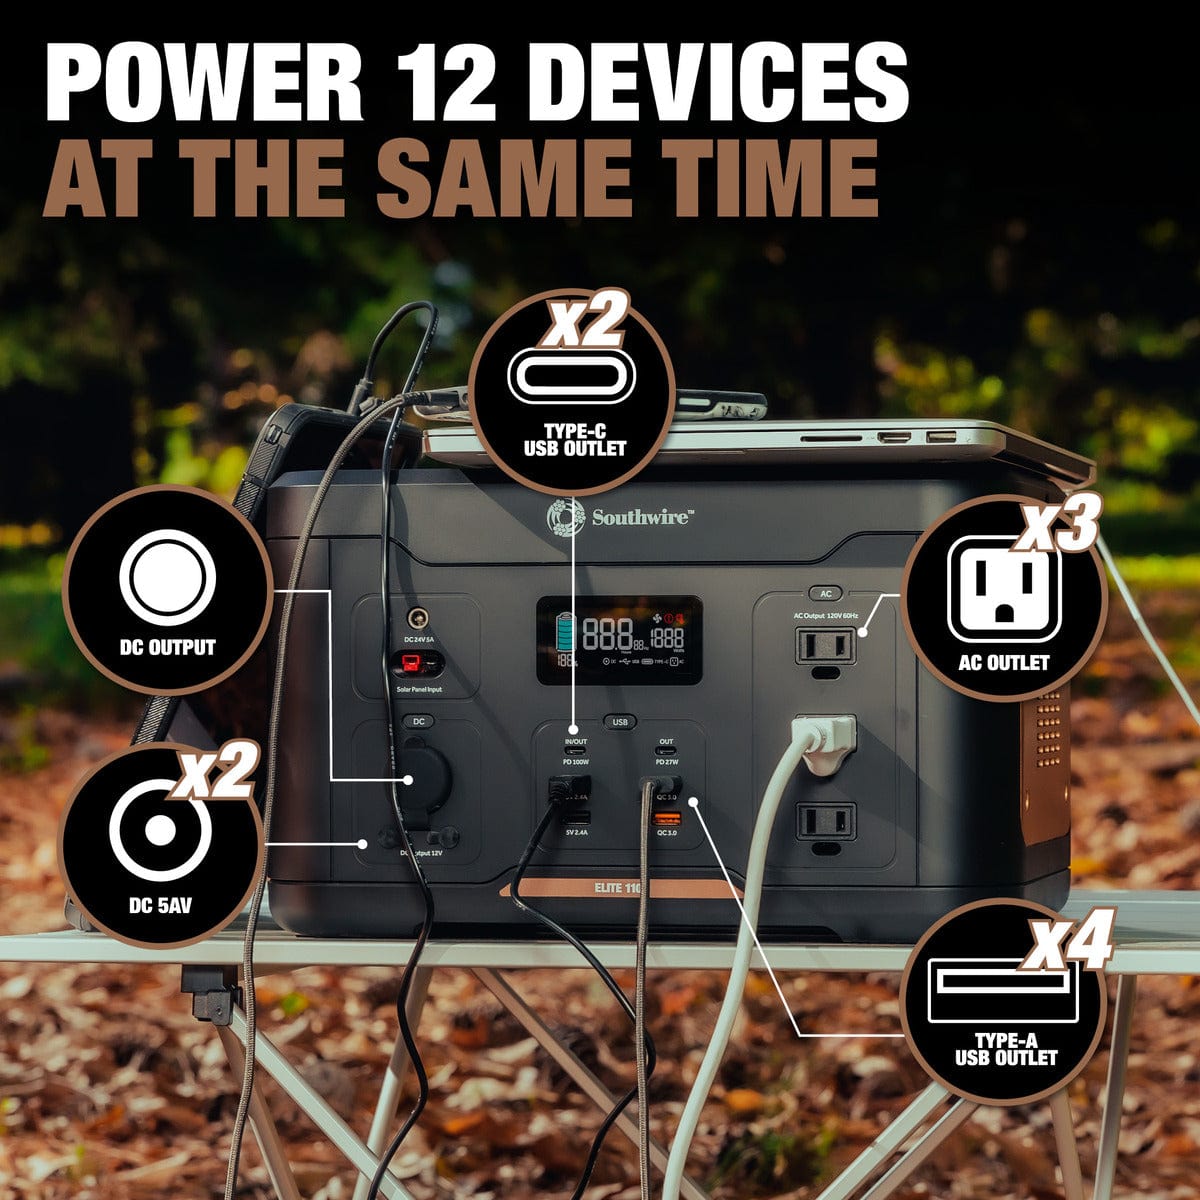 Southwire Power Supply Southwire Elite 1100 Series™ Portable Power Station - 53253